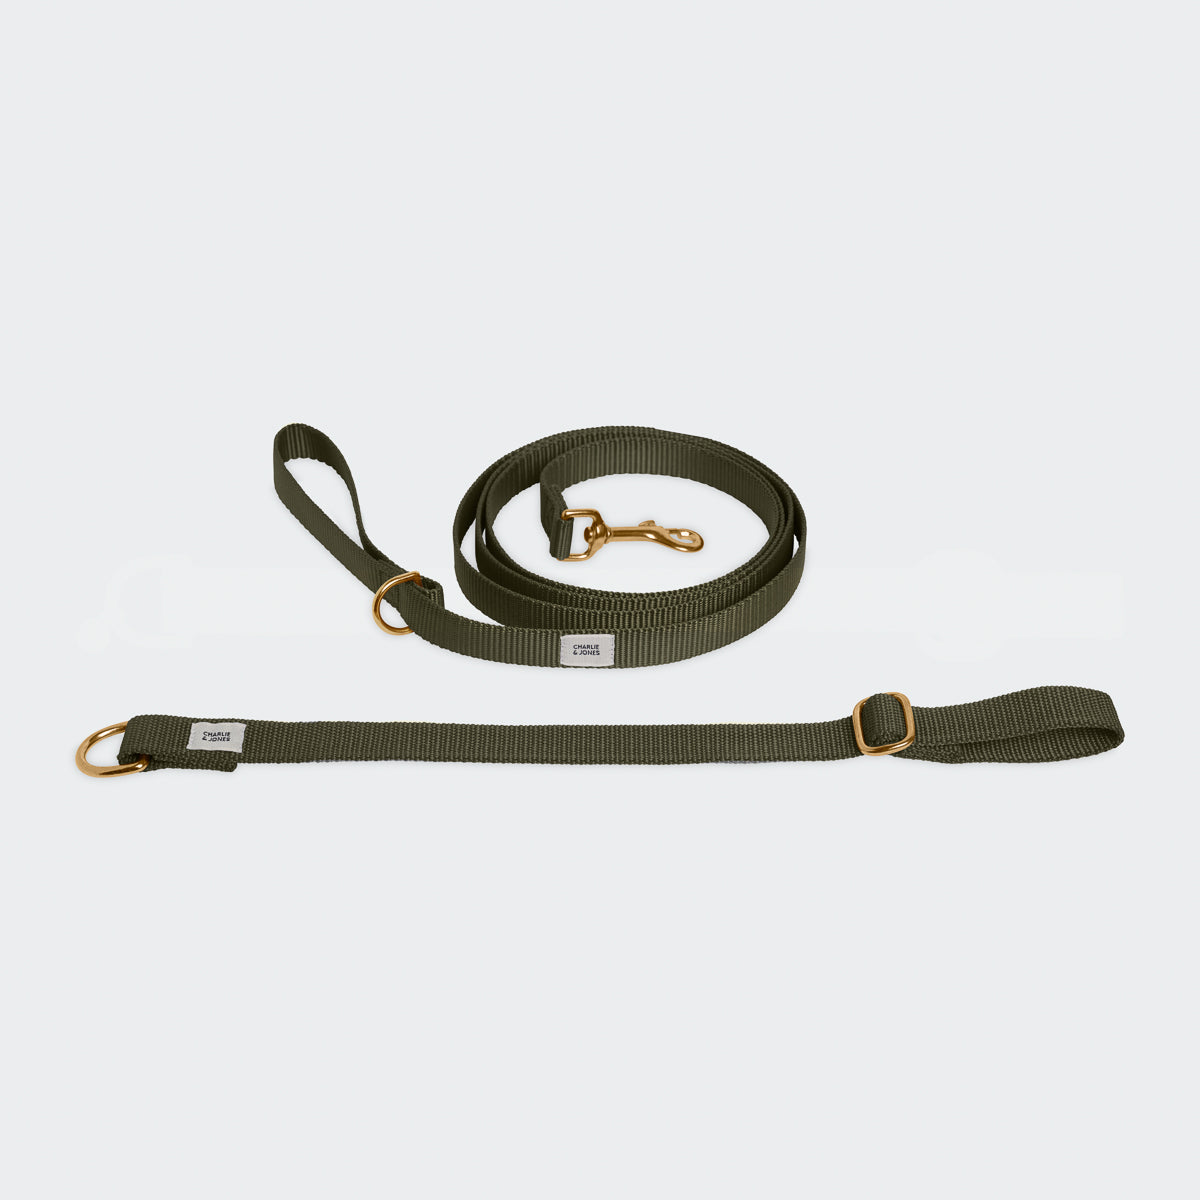 Leash with name - Olive